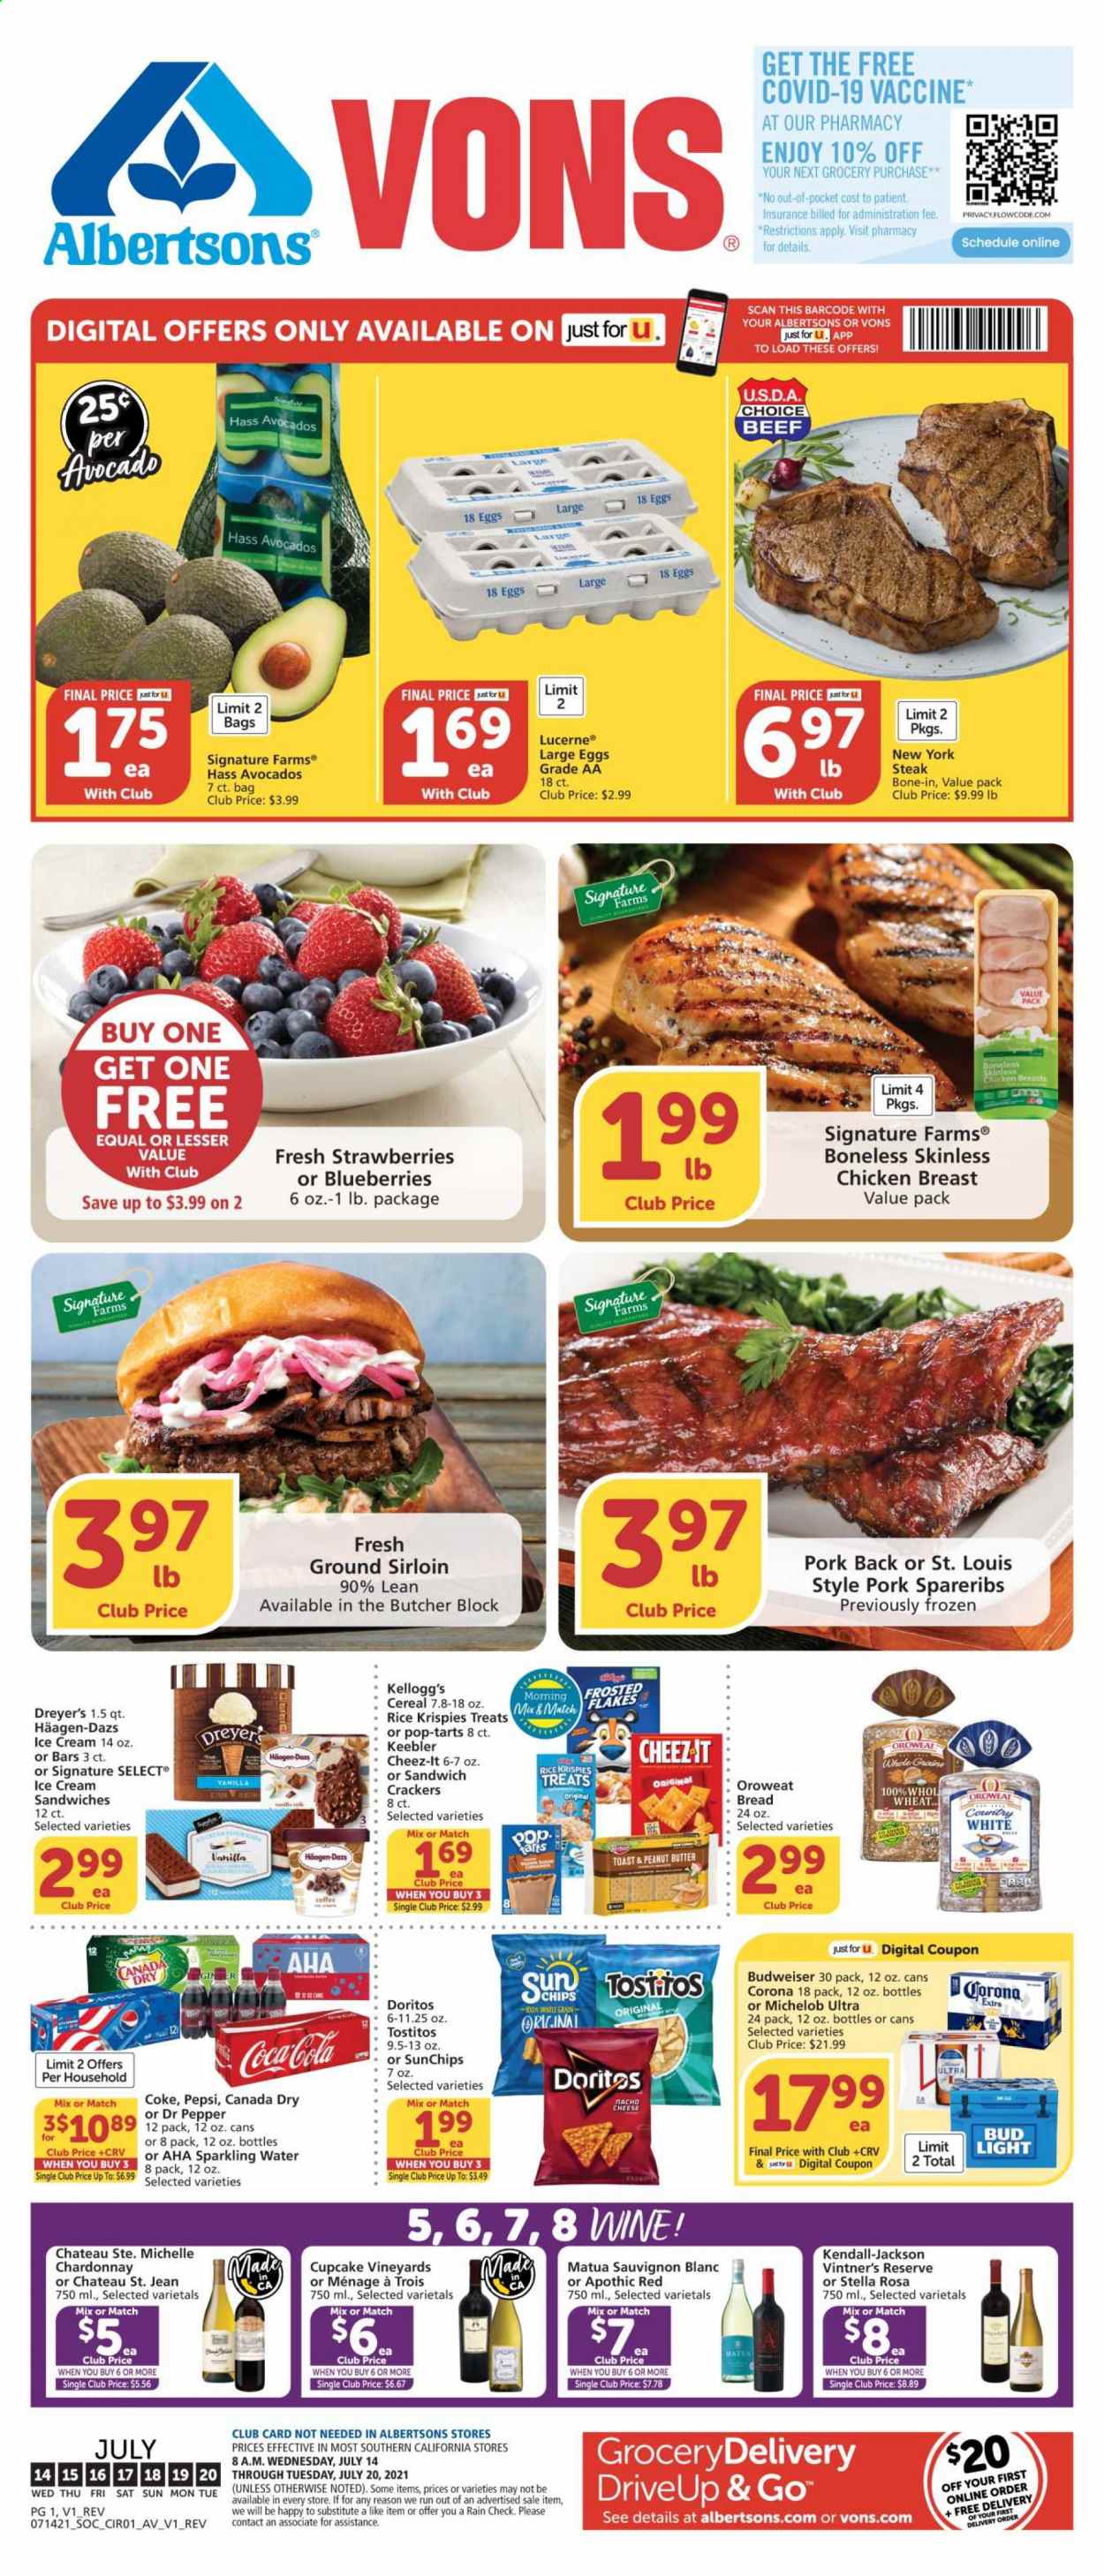 thumbnail - Vons Flyer - 07/14/2021 - 07/20/2021 - Sales products - bread, avocado, blueberries, strawberries, chicken breasts, steak, pork spare ribs, cheese, large eggs, ice cream, ice cream sandwich, Häagen-Dazs, crackers, Kellogg's, Pop-Tarts, Keebler, Doritos, Cheez-It, Tostitos, cereals, Rice Krispies, peanut butter, Canada Dry, Coca-Cola, Pepsi, Dr. Pepper, sparkling water, coffee, white wine, Chardonnay, wine, Sauvignon Blanc, Cupcake Vineyards, gin, beer, Budweiser, Michelob, Bud Light, Corona Extra. Page 1.